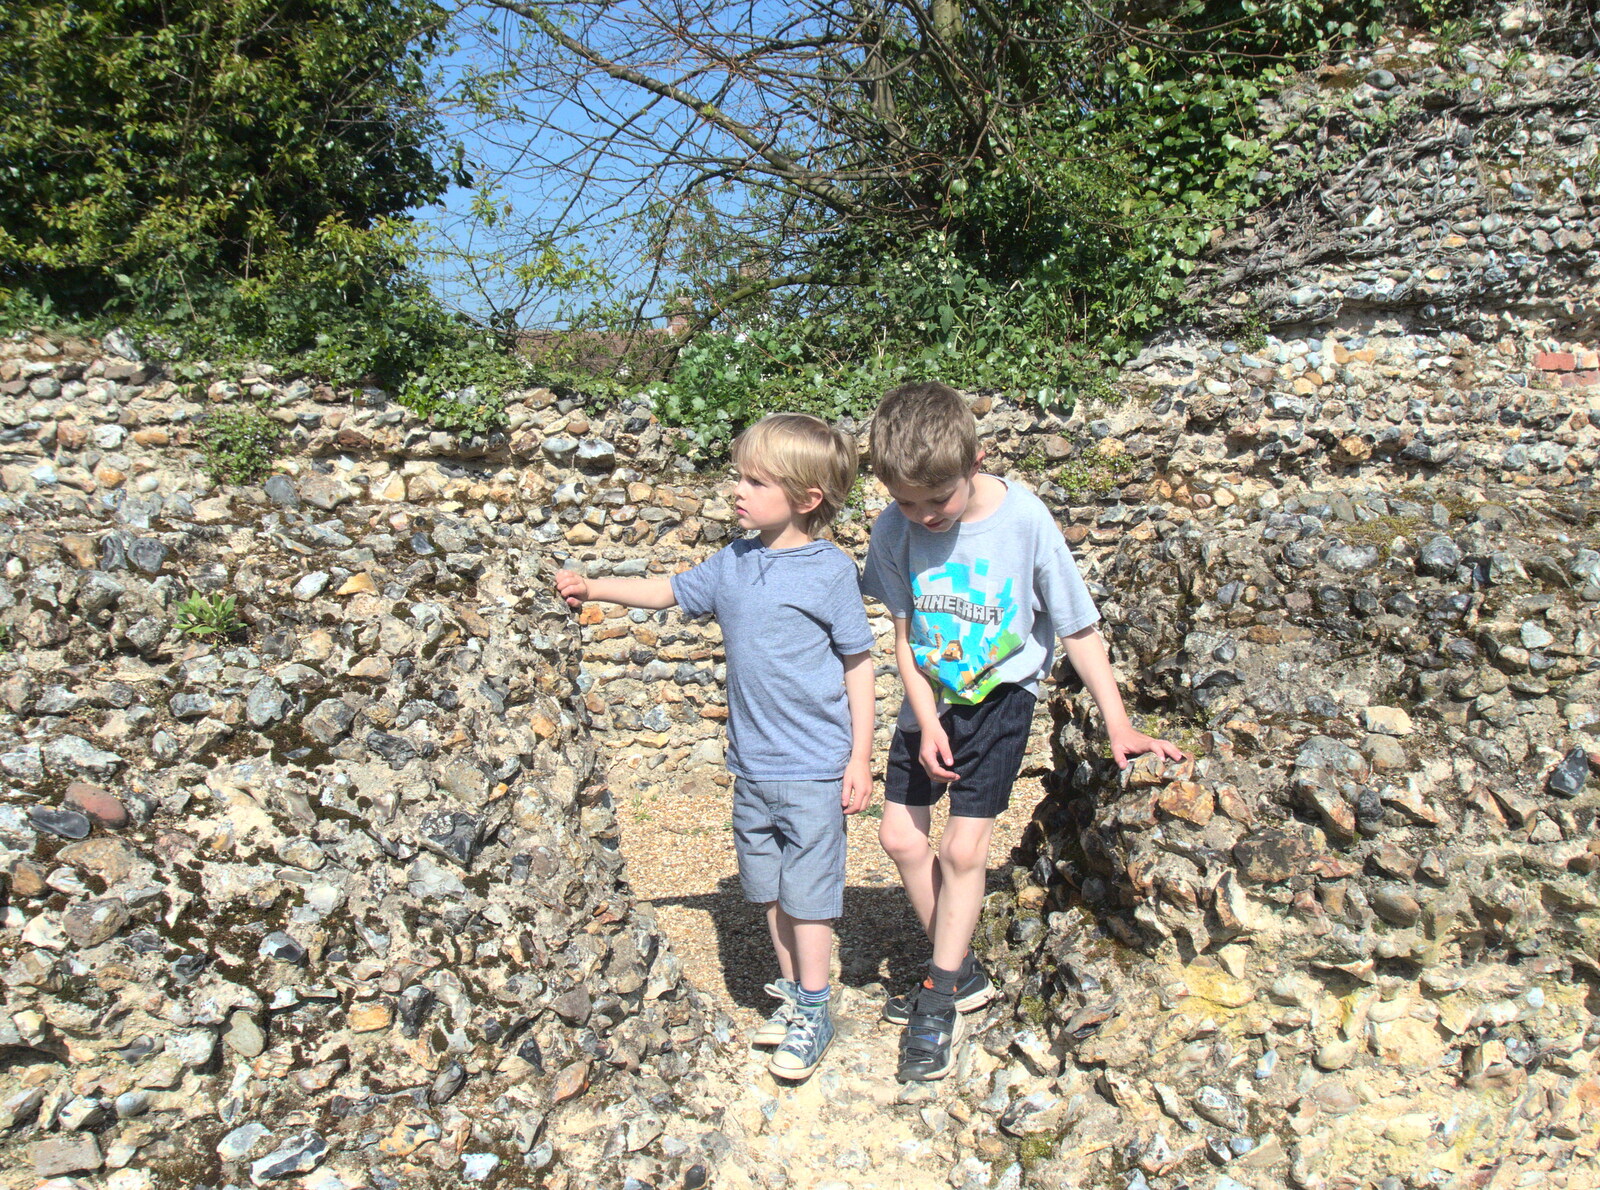 Harry and Fred on the original 1160AD wall from Cycling to Bigod's Castle, Eye, Suffolk - 9th April 2017